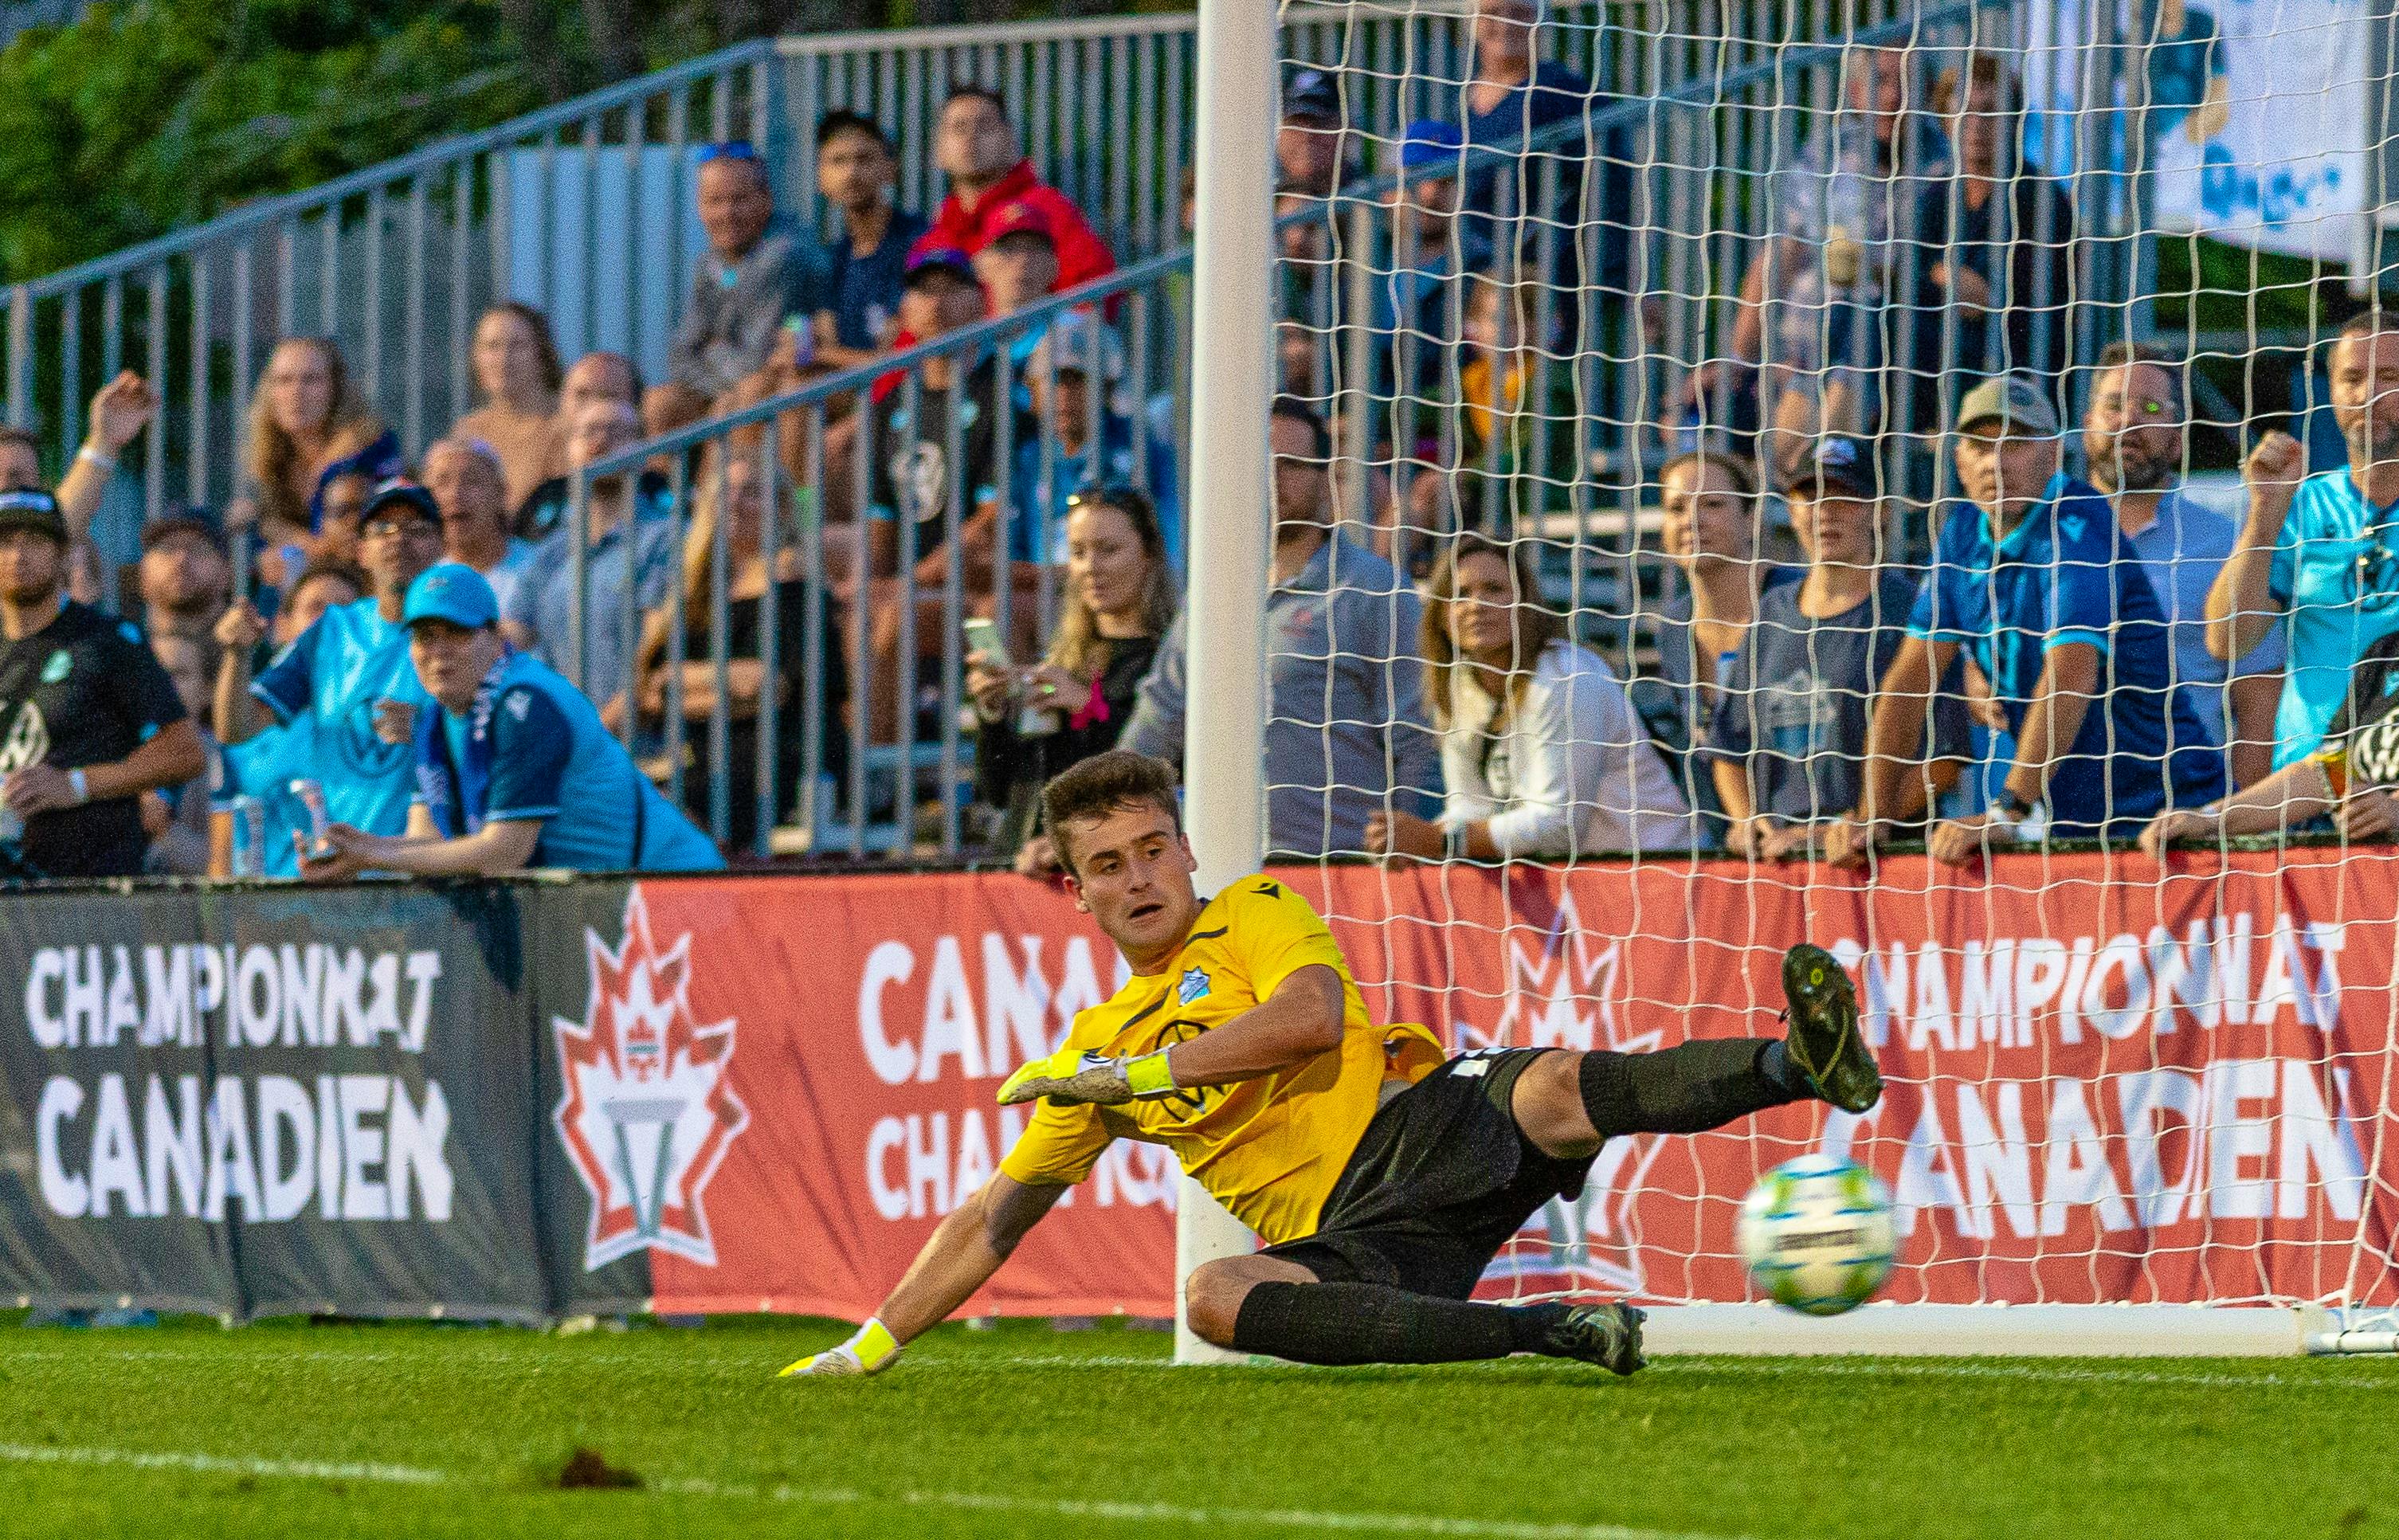 Kieran Baskett slides to make a stop during the HFX Wanderers’ Canadian Championship preliminary match against AS Blainville on Aug. 17, The match marked the professional debut of the keeper from Halifax. - TREVOR MacMILLAN / CANADIAN PREMIER LEAGUE